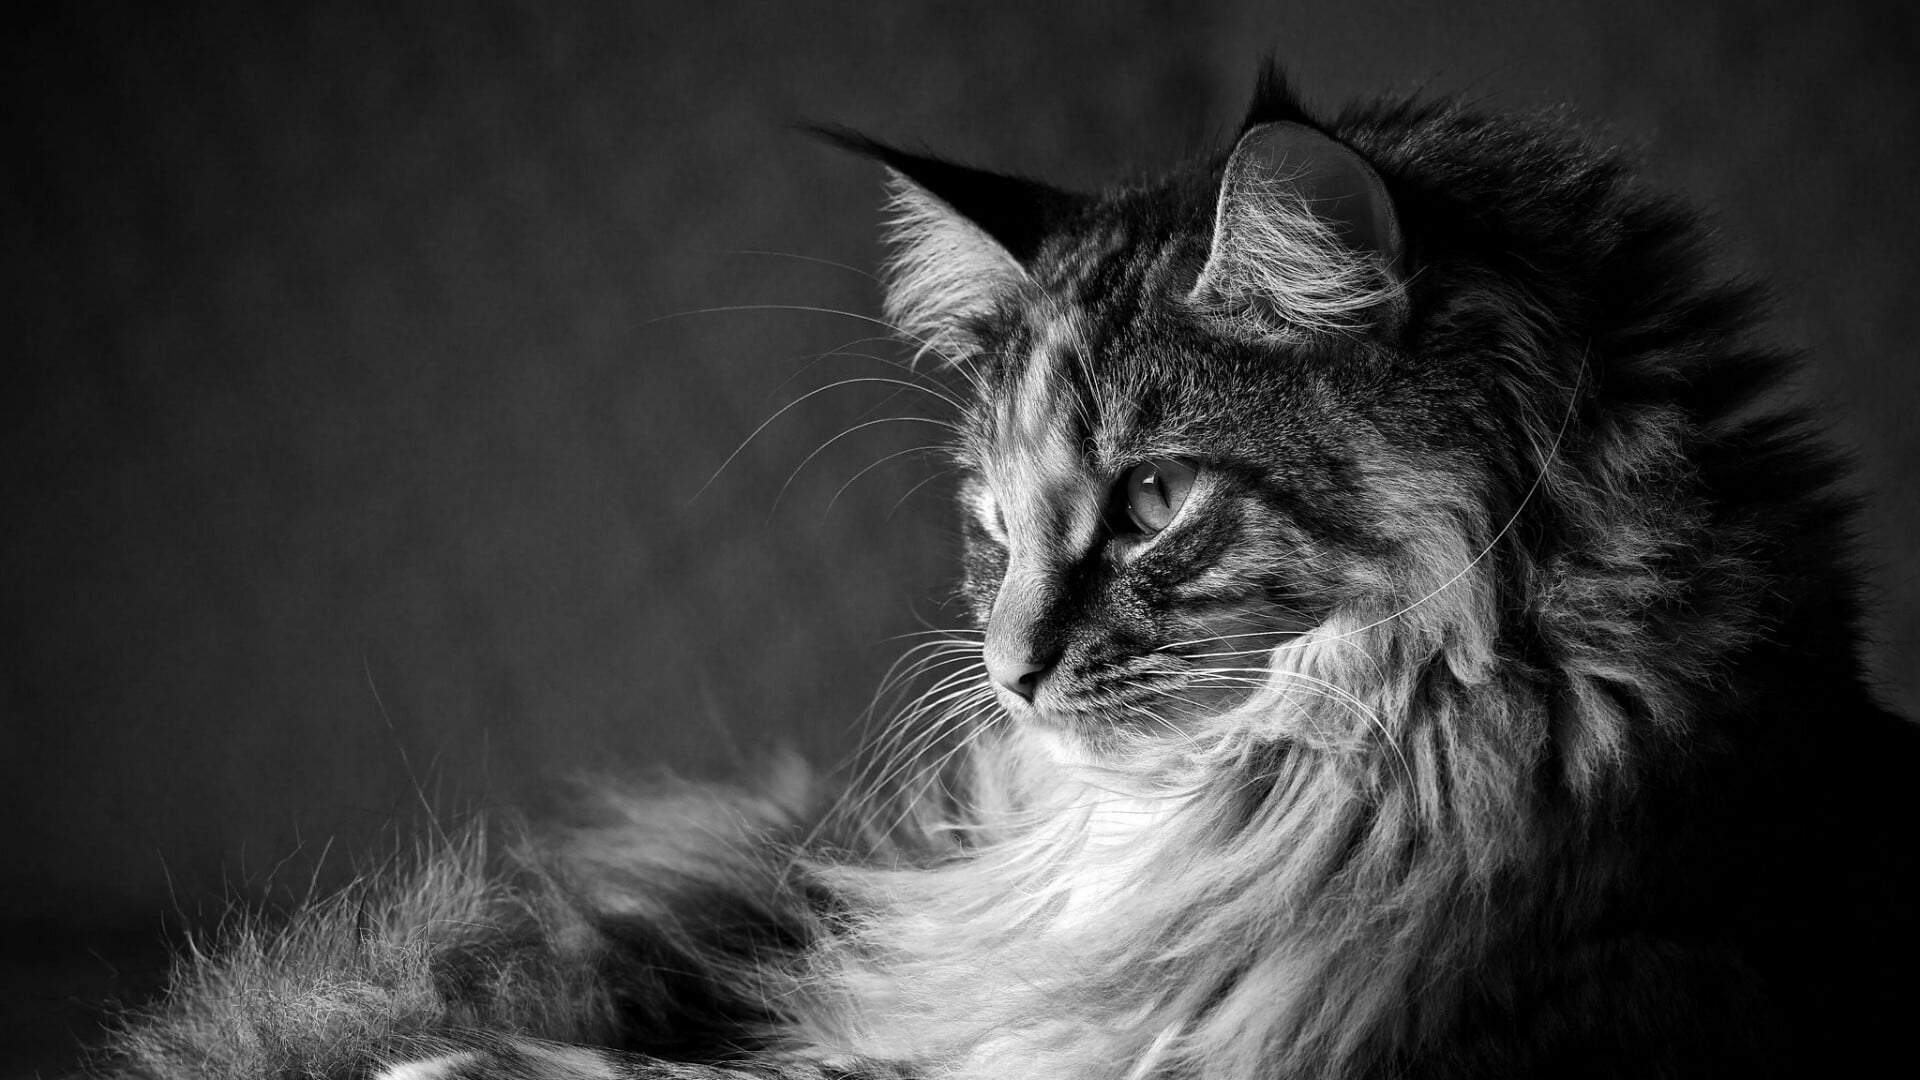 cat, fluffy cat, maine coon, whiskers, black and white, monochrome photography